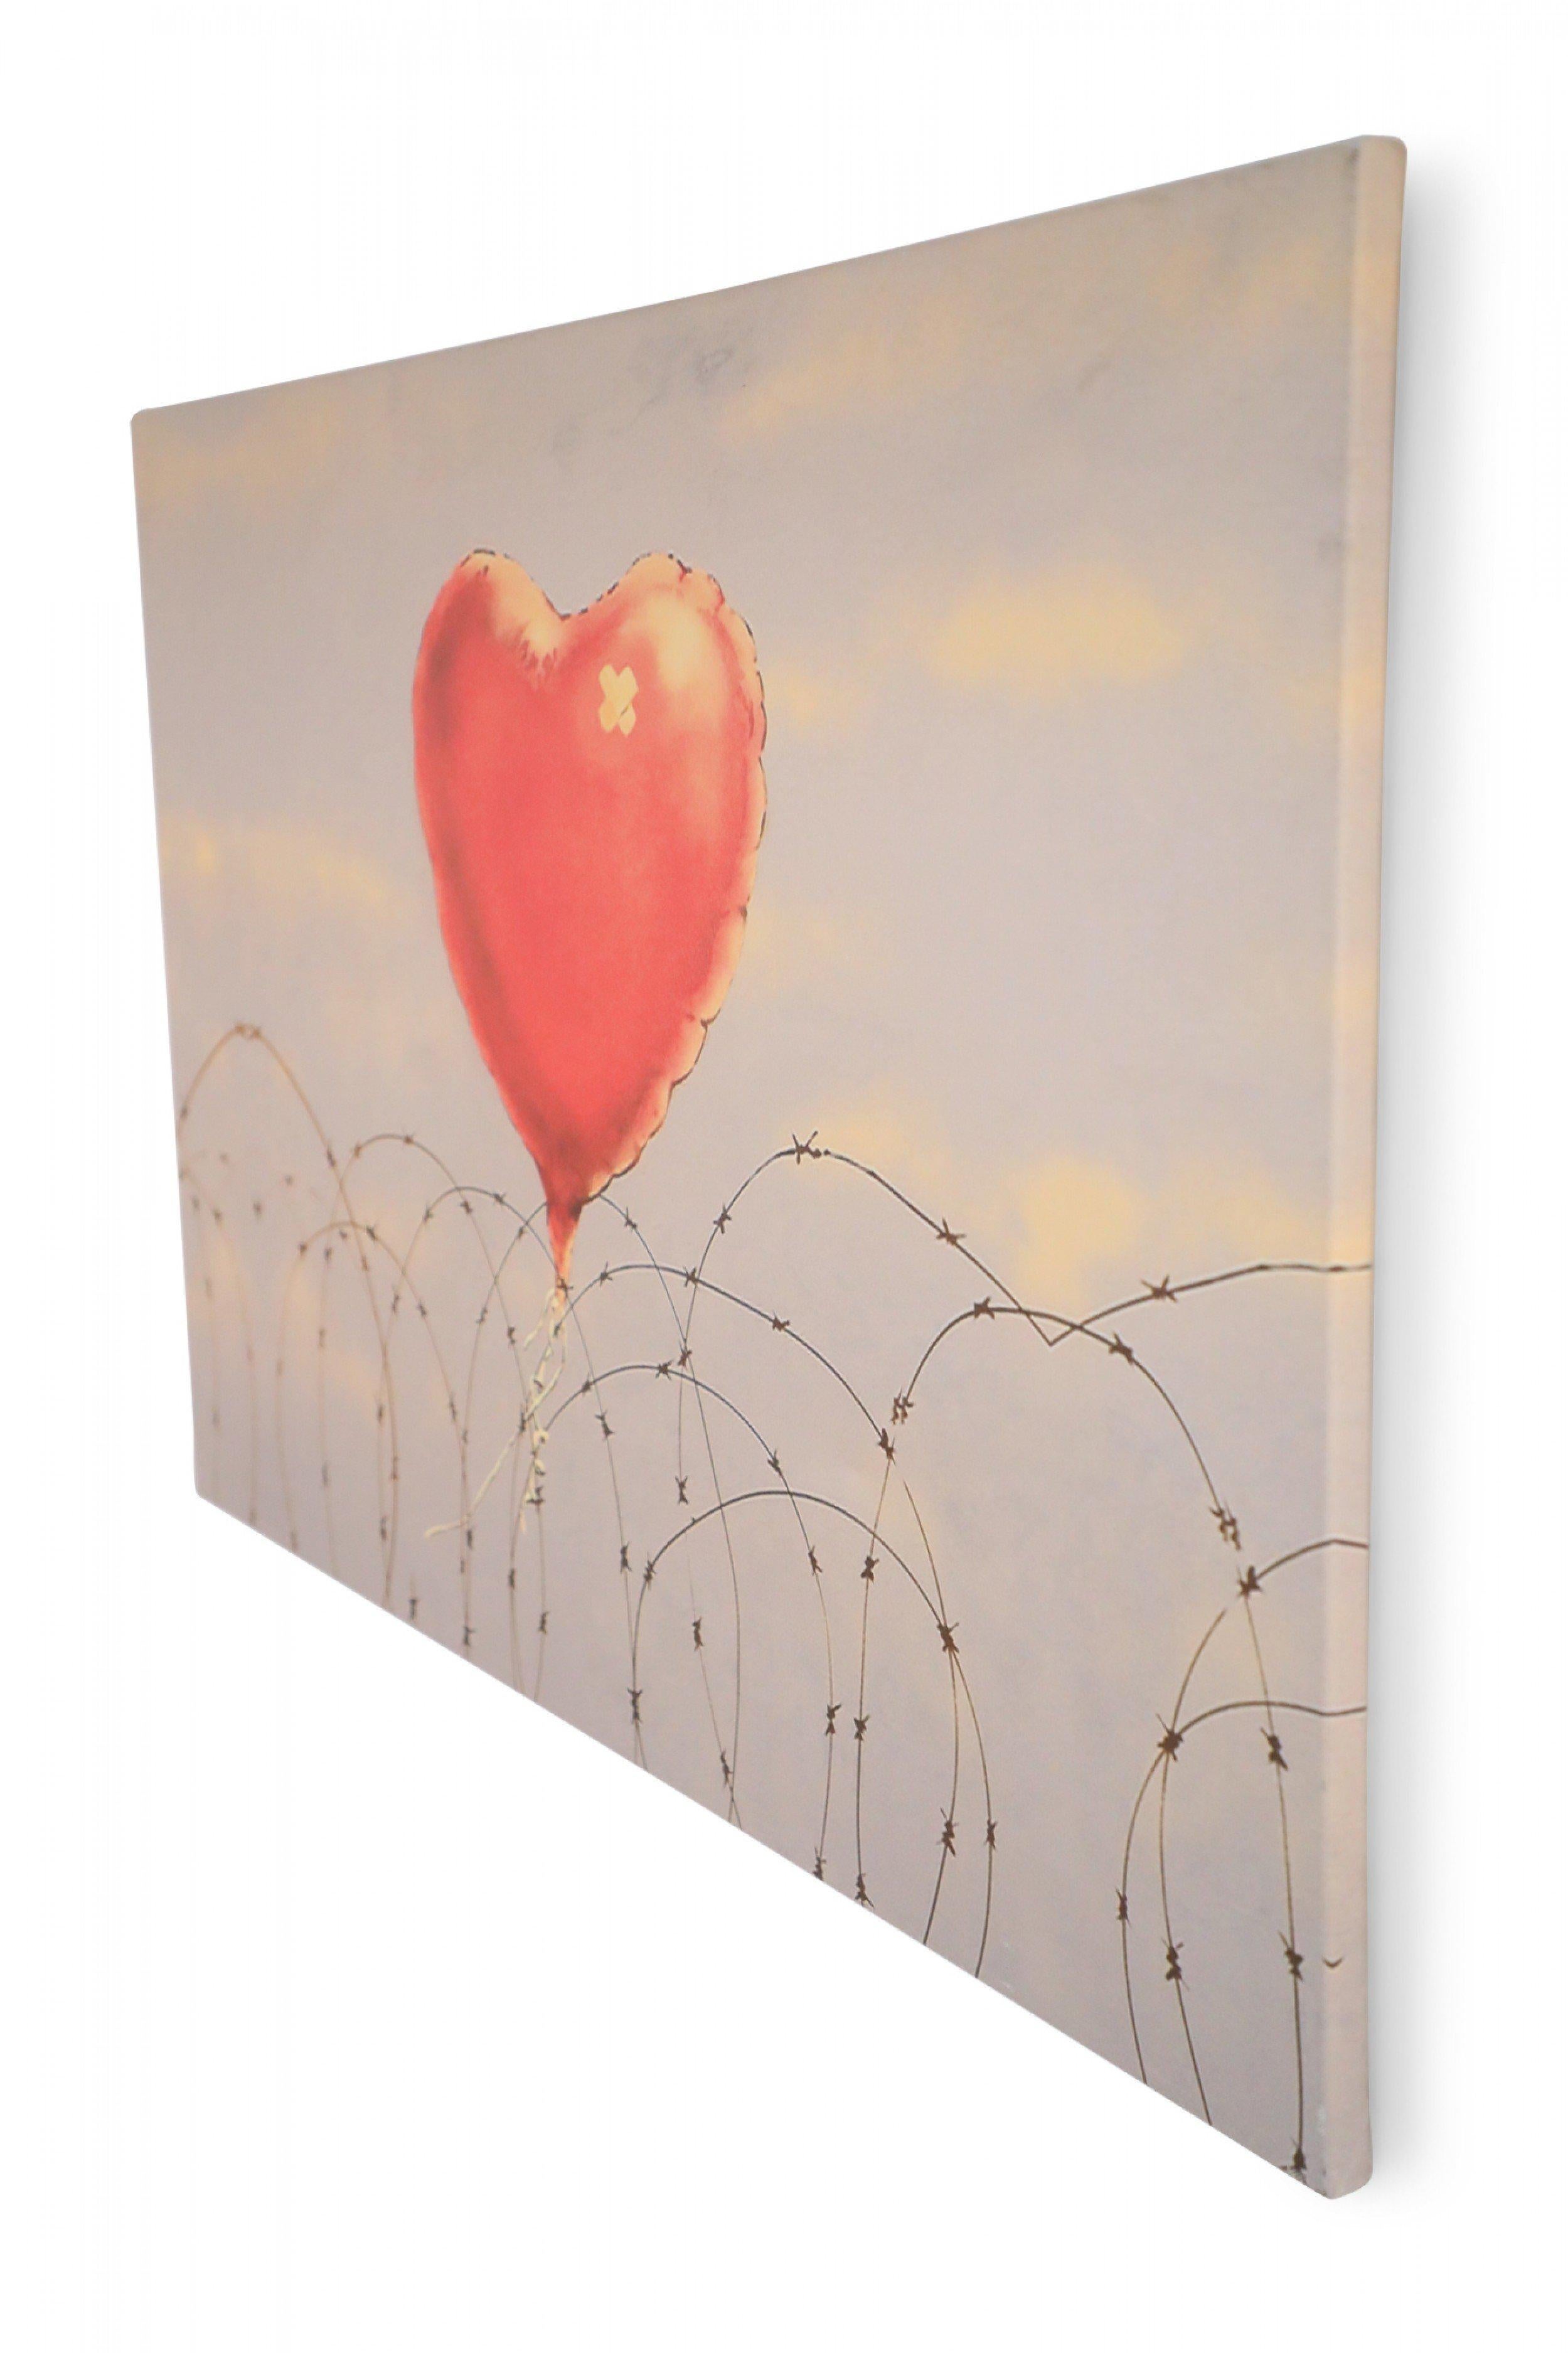 Vintage (20th Century) rectangular giclee print on canvas depicting a heart, mylar balloon with bandaids forming an 